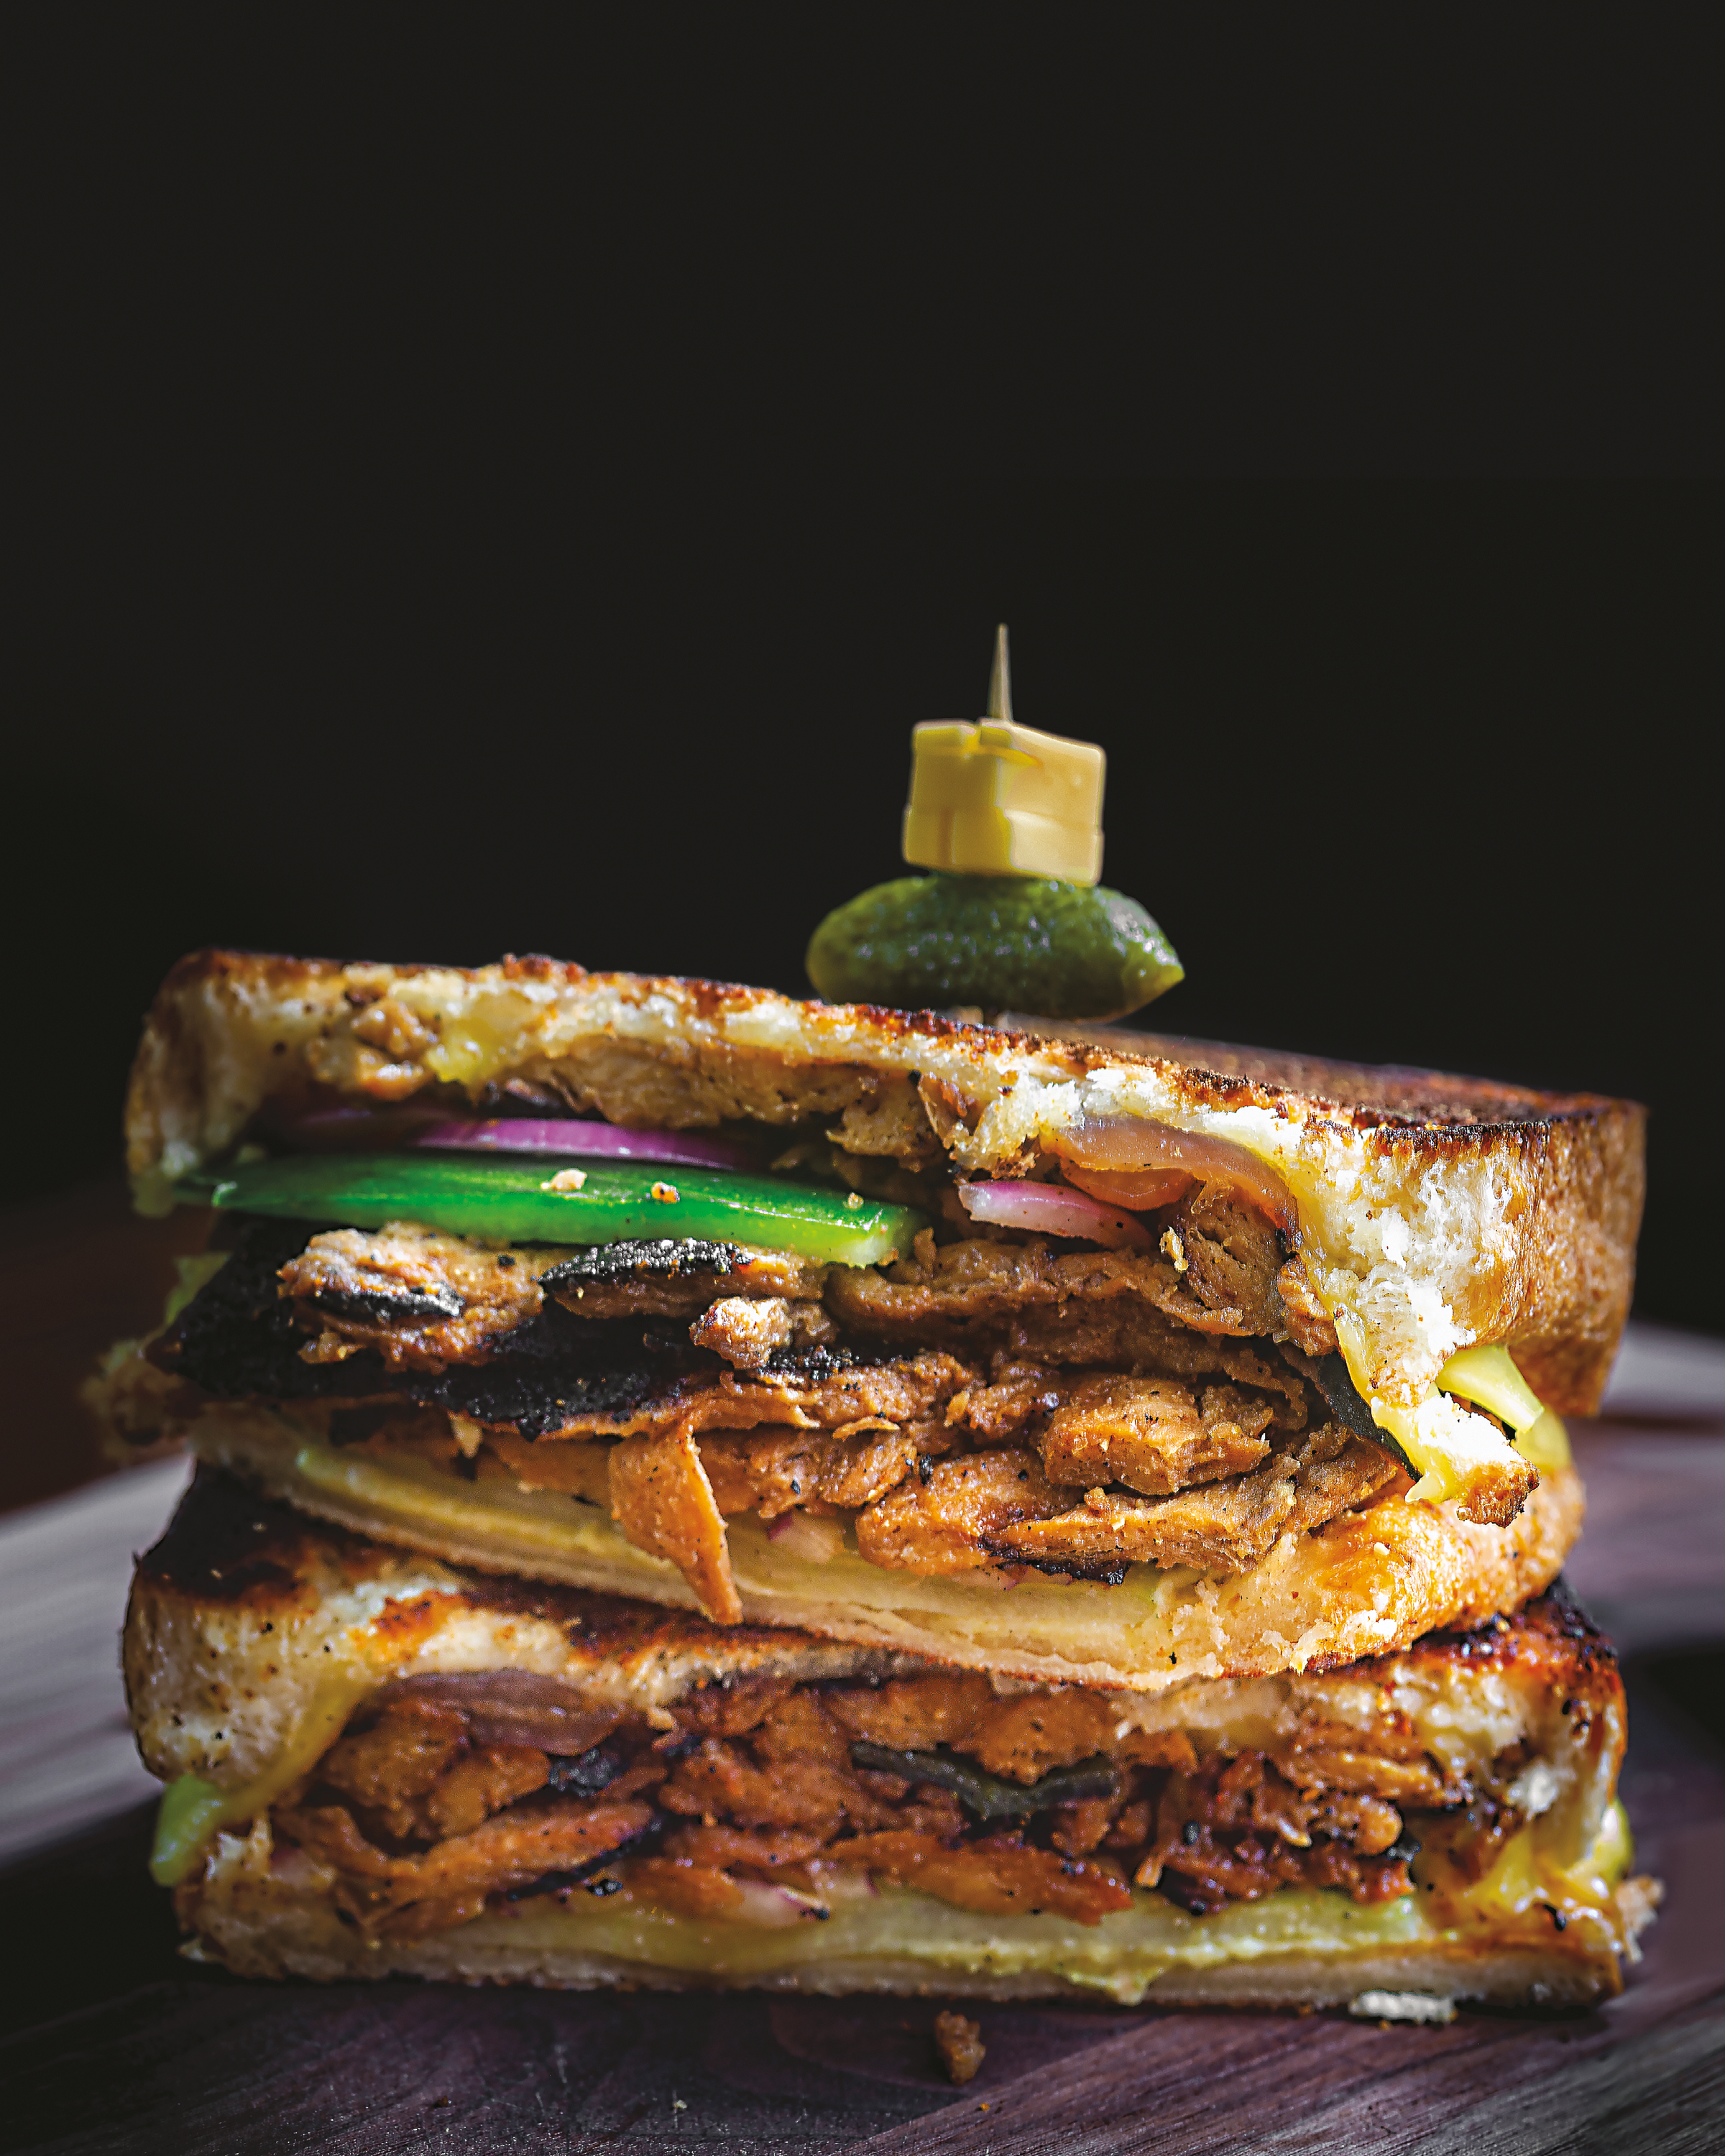 A toasted sandwich sliced in half so you can see the interior, filled with green pepper, onion, and bulgogi